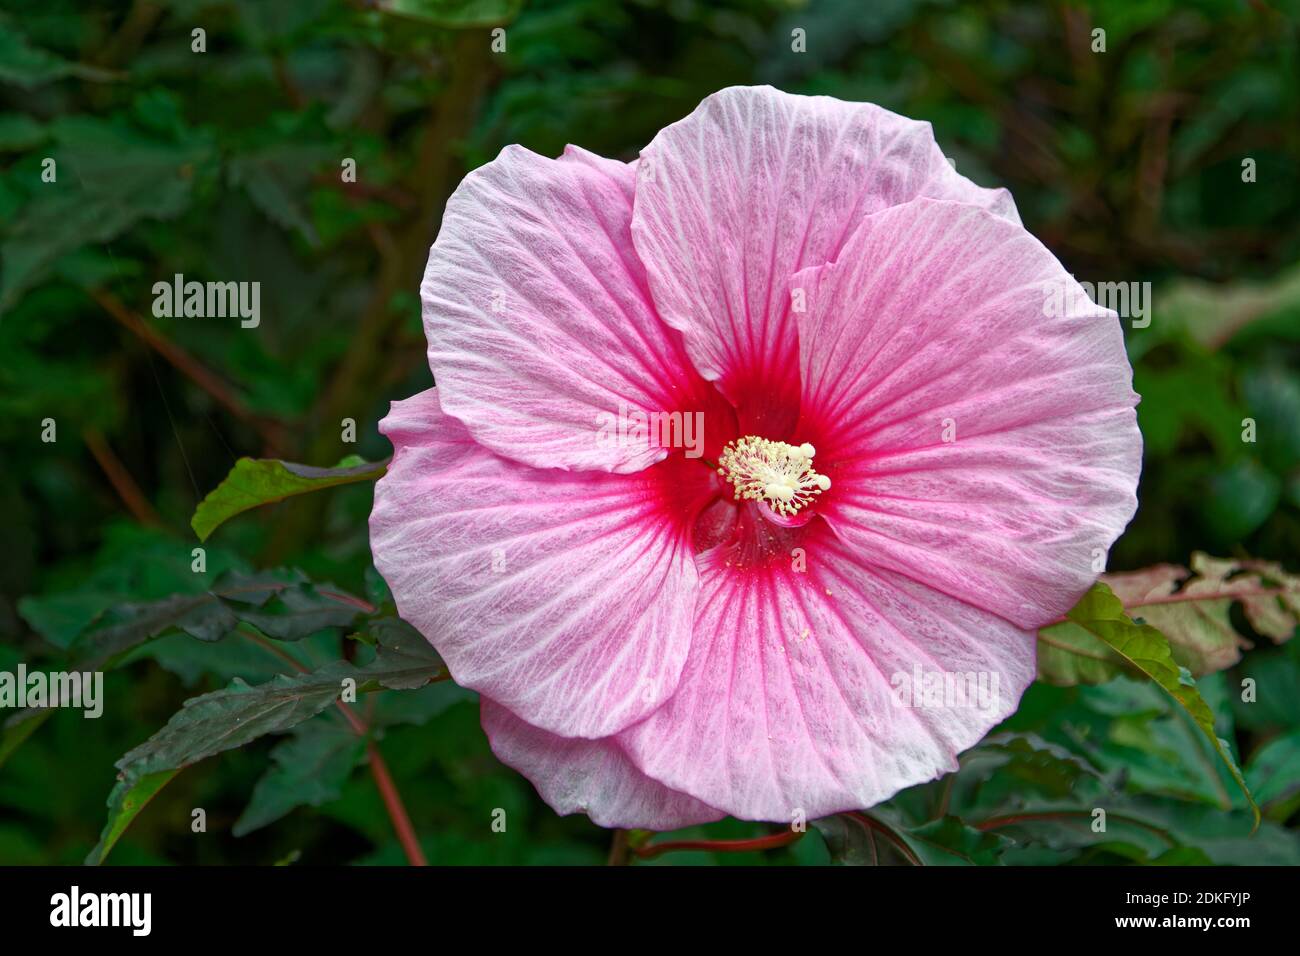 pink hibiscus, cultivated flower, rose-red center, pale yellow stigma, Malvaceae, Pennsylvania; summer Stock Photo